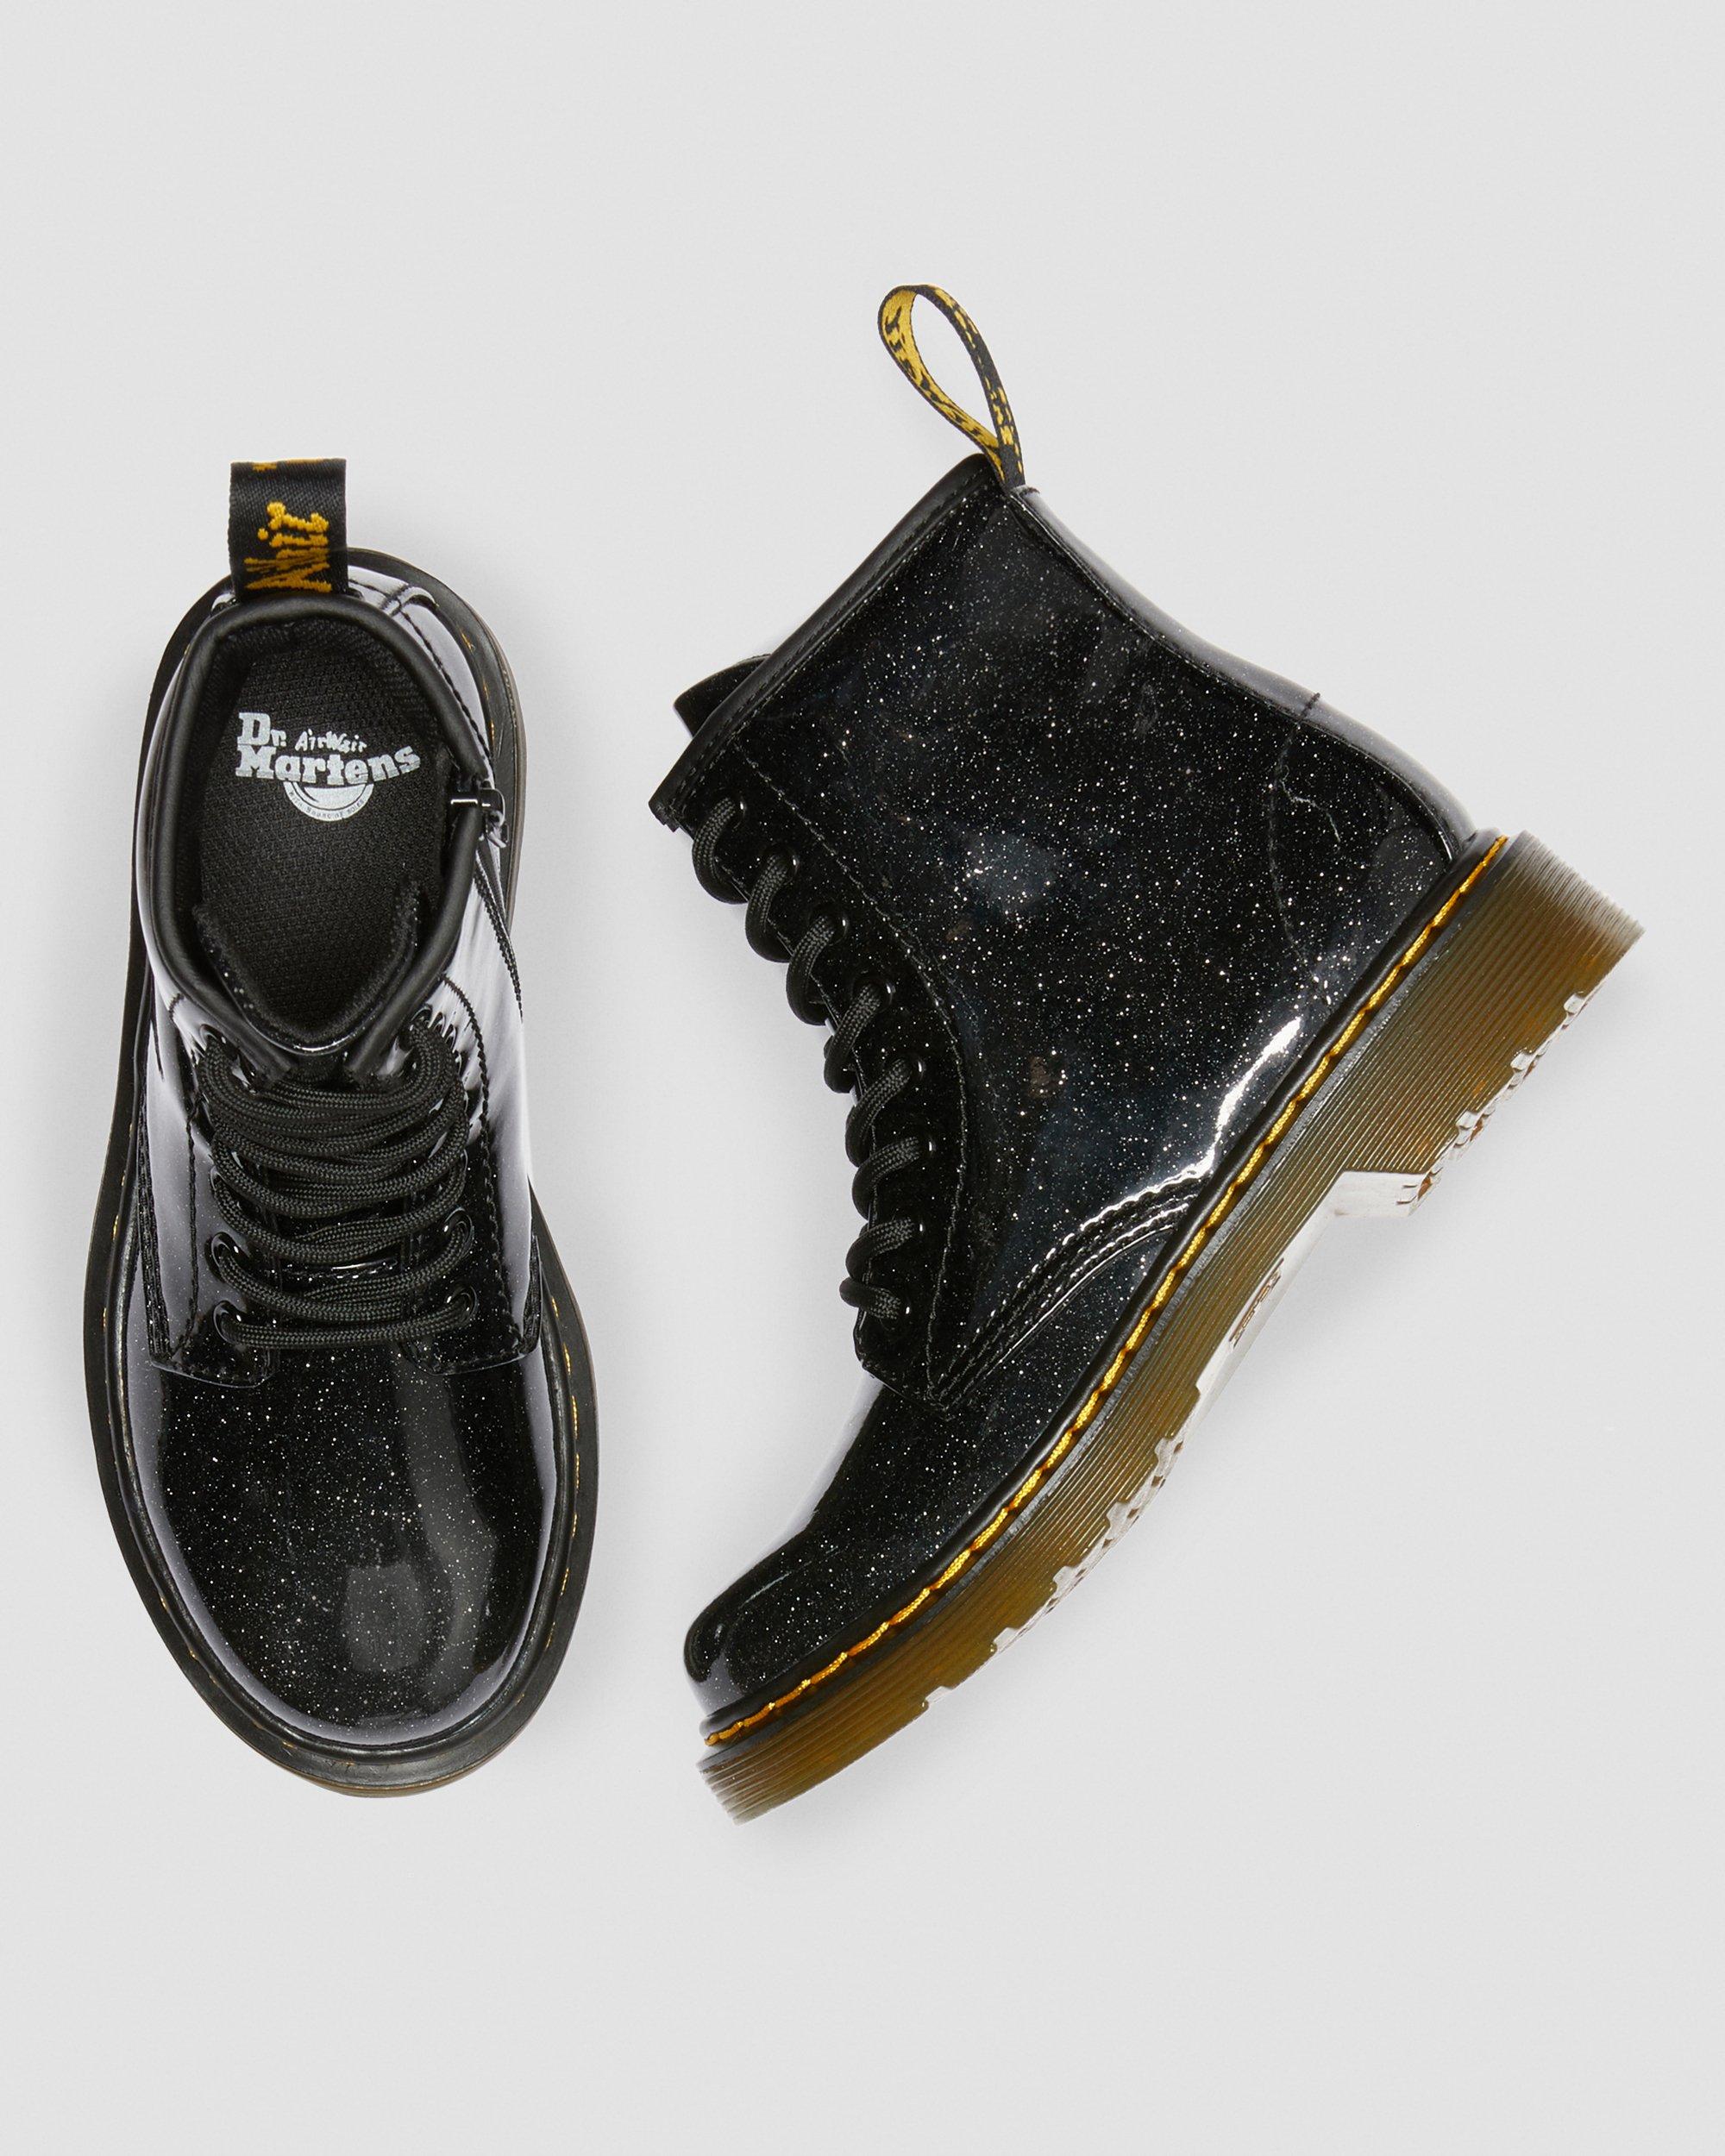 Black Glitter Up Lace Martens in | Junior Dr. 1460 Boots